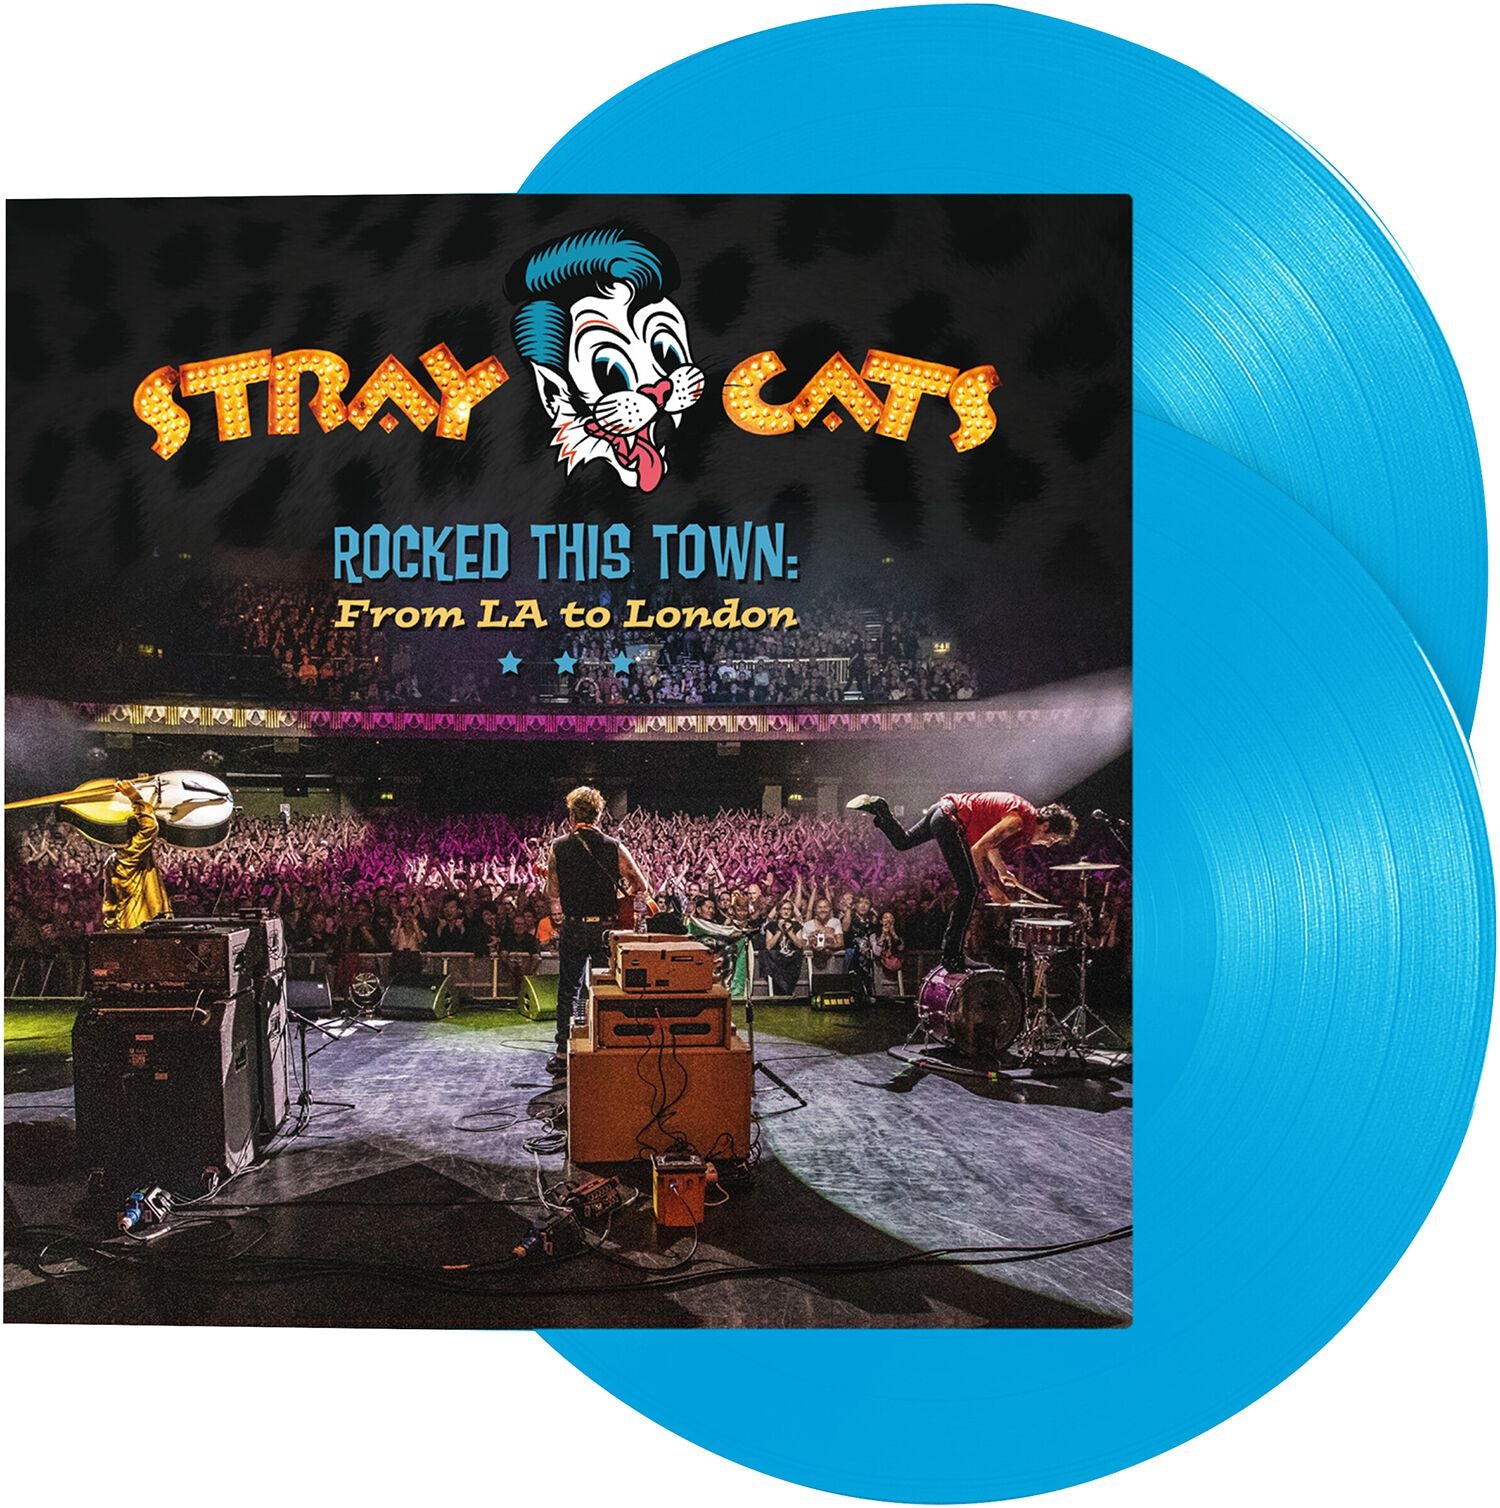 STRAY CATS – Rocked This Town: From LA to London – 2LP – Limited Light Blue Vinyl